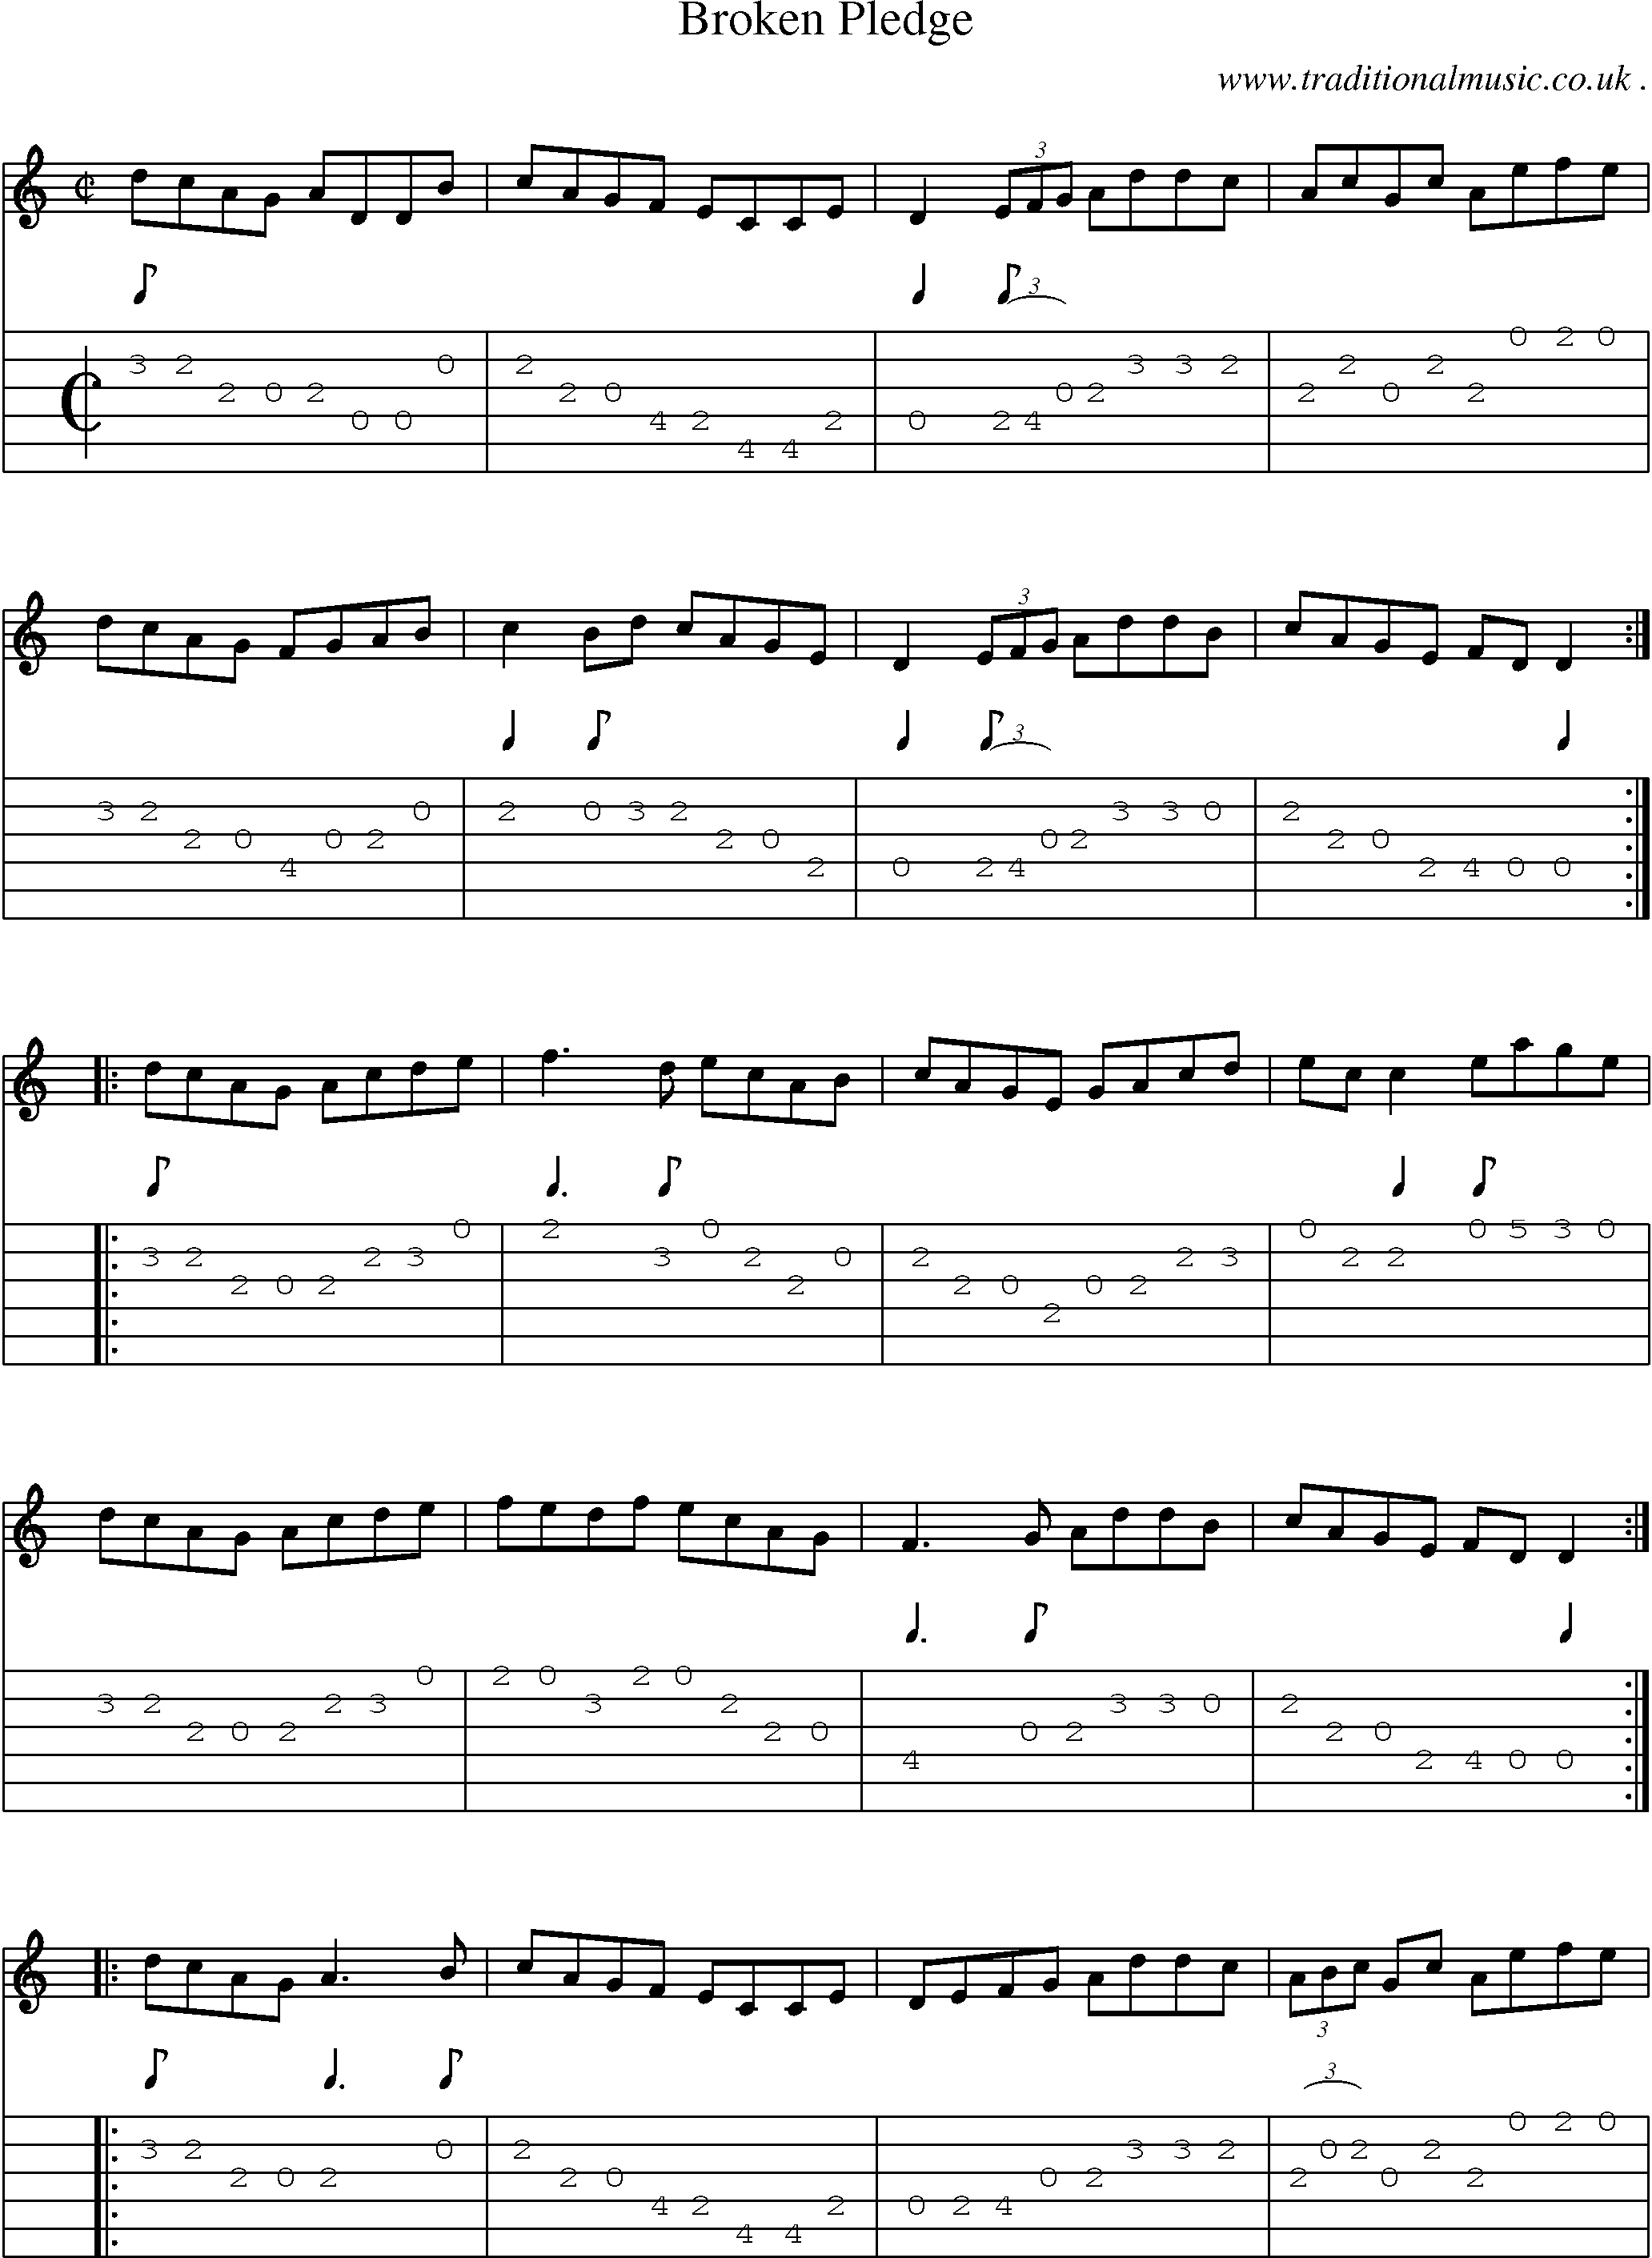 Sheet-Music and Guitar Tabs for Broken Pledge